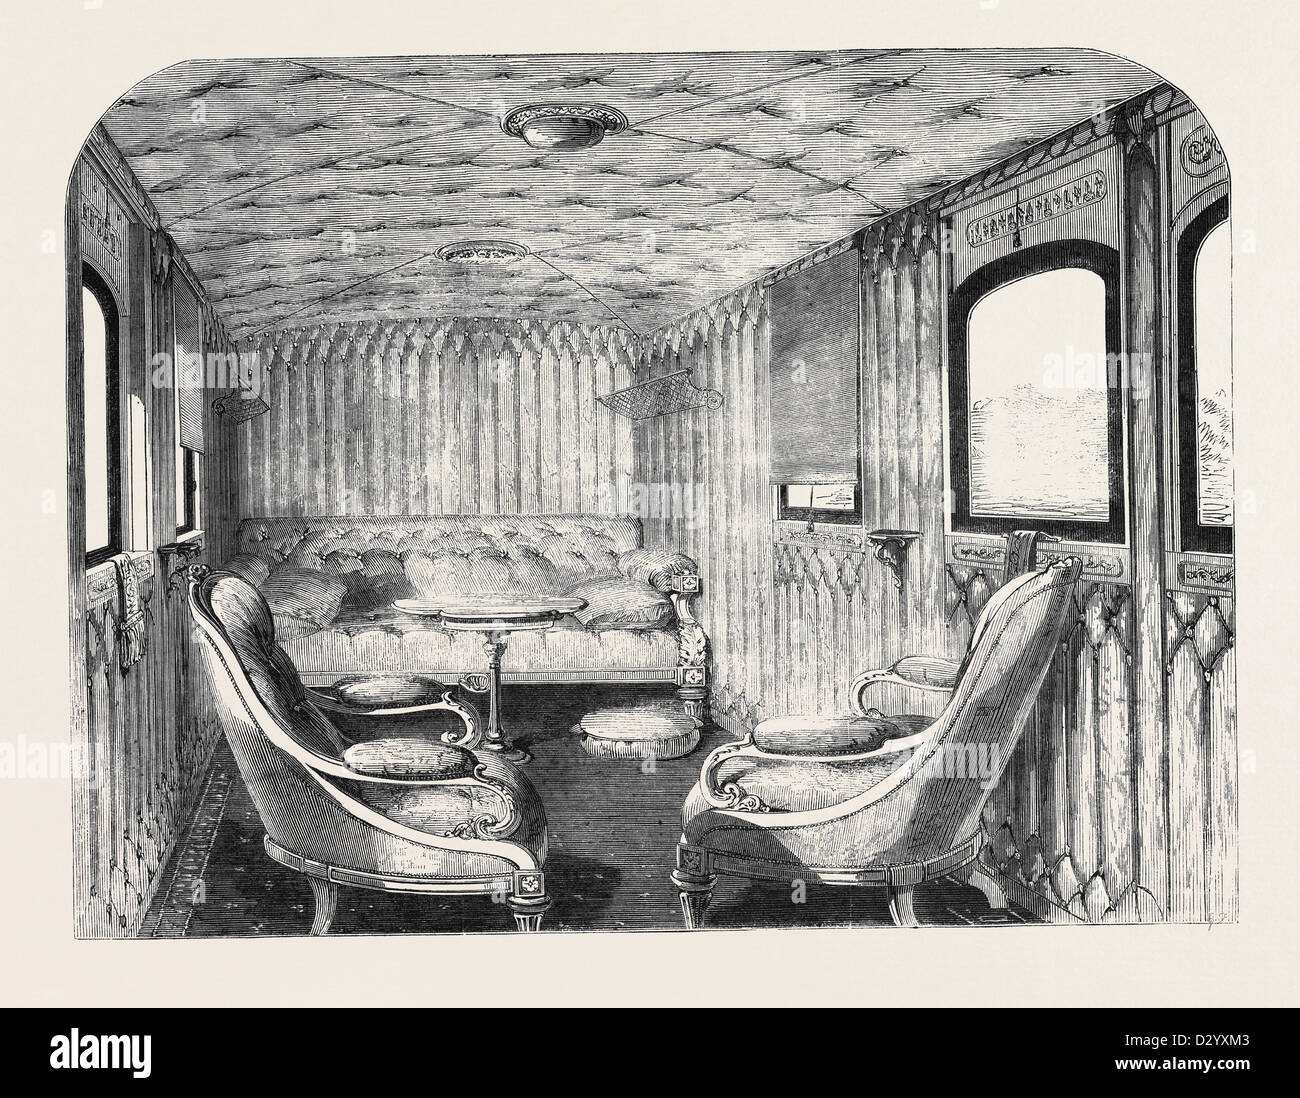 SALOON OF HER MAJESTY'S CARRIAGE ON THE LONDON AND NORTH-WESTERN RAILWAY. Stock Photo